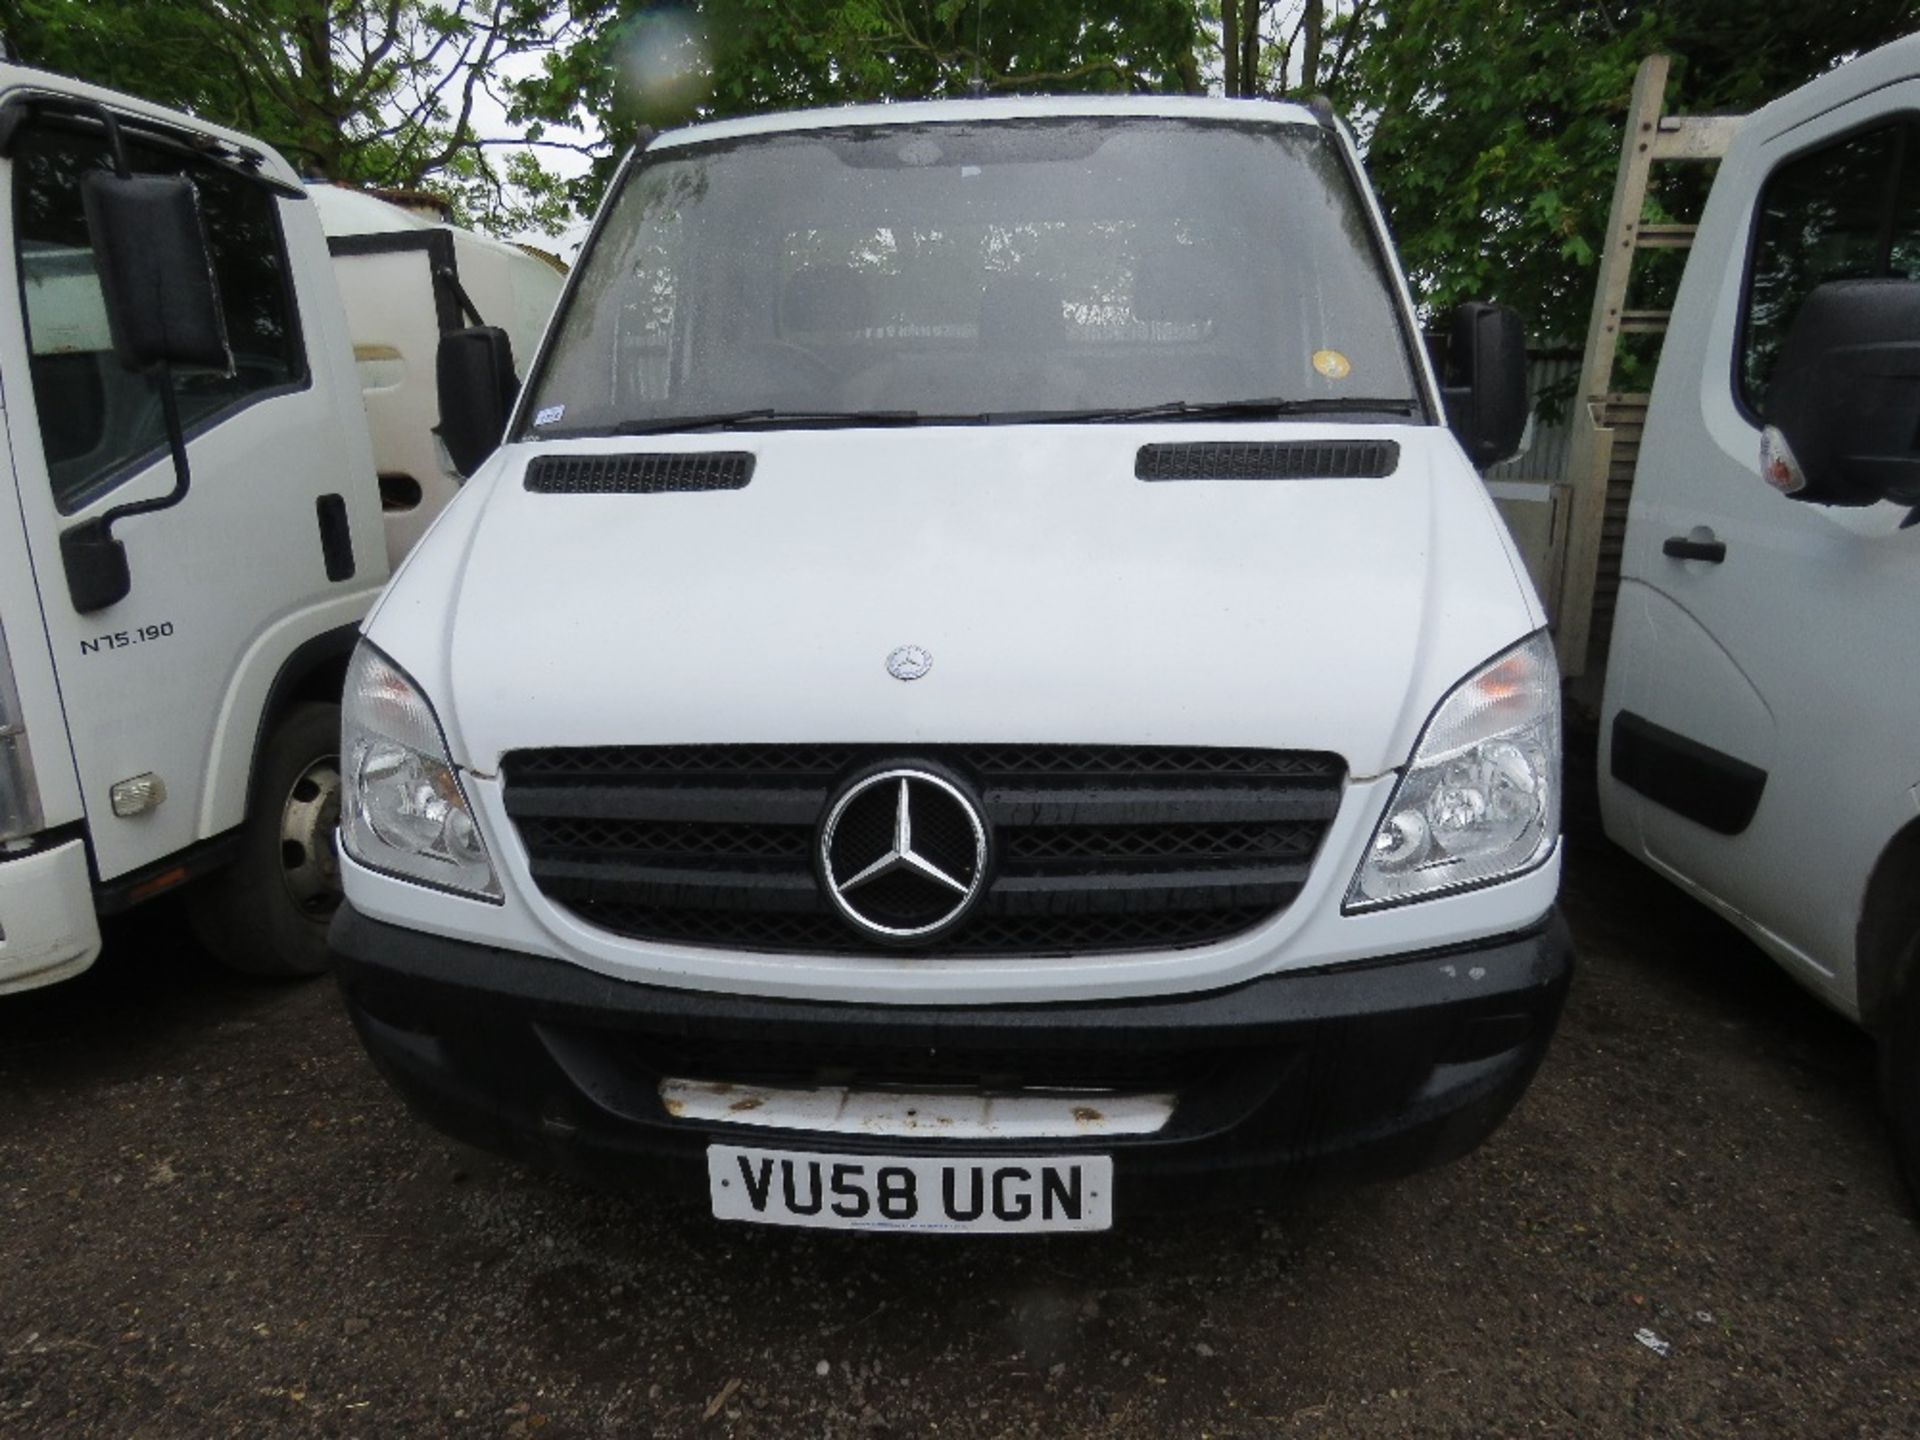 MERCEDES SPRINTER CHASSIS CAB 3500KG TRUCK REG:VU58 UGN. 13FT LENGTH CHASSIS/BODY AREA APPROX. 415,9 - Image 2 of 9